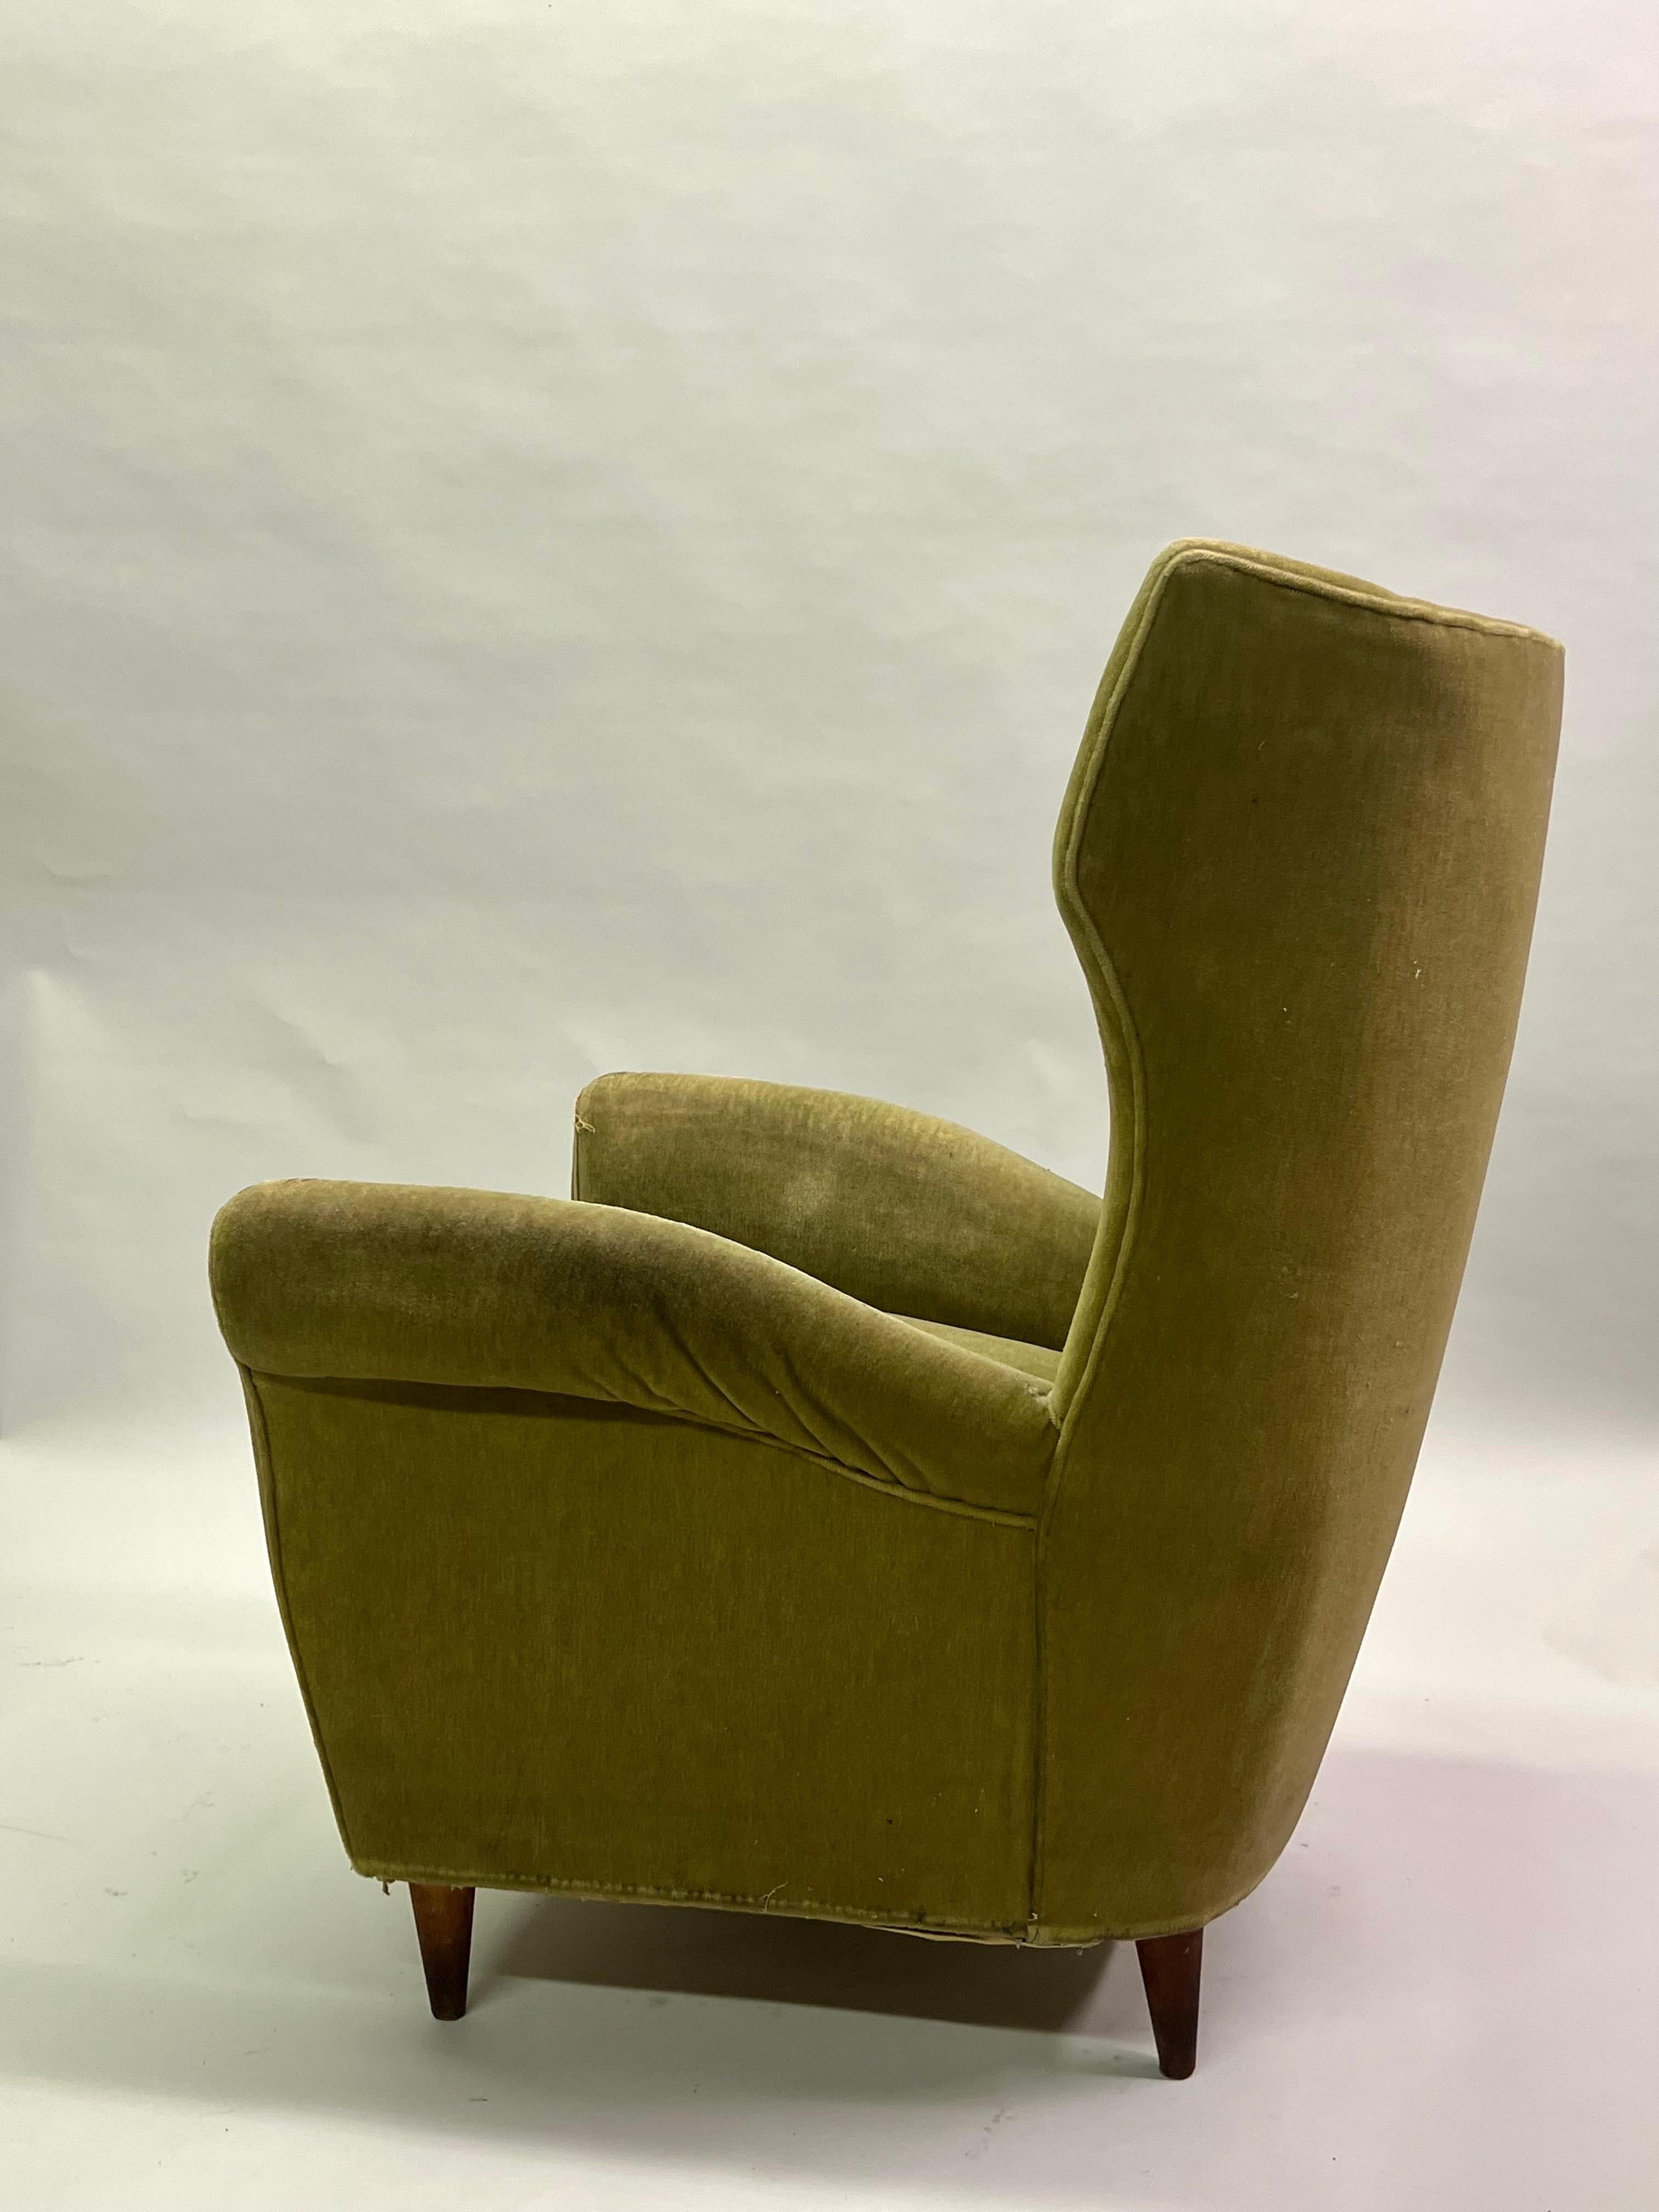 Upholstery Pair of Italian Mid-Century Wingback Lounge Chairs Attr. to Gio Ponti, Model 512 For Sale